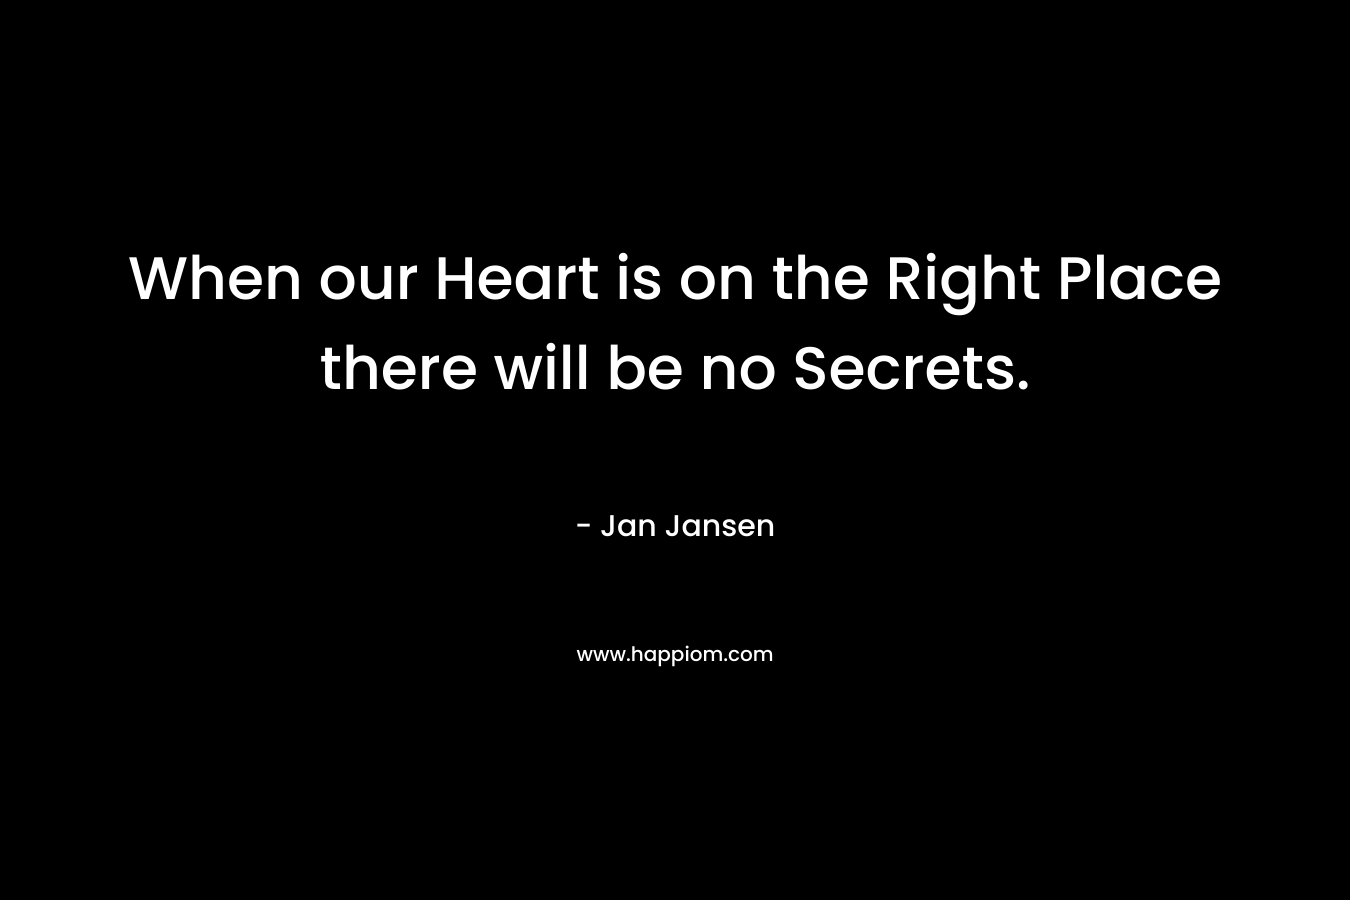 When our Heart is on the Right Place there will be no Secrets. – Jan Jansen